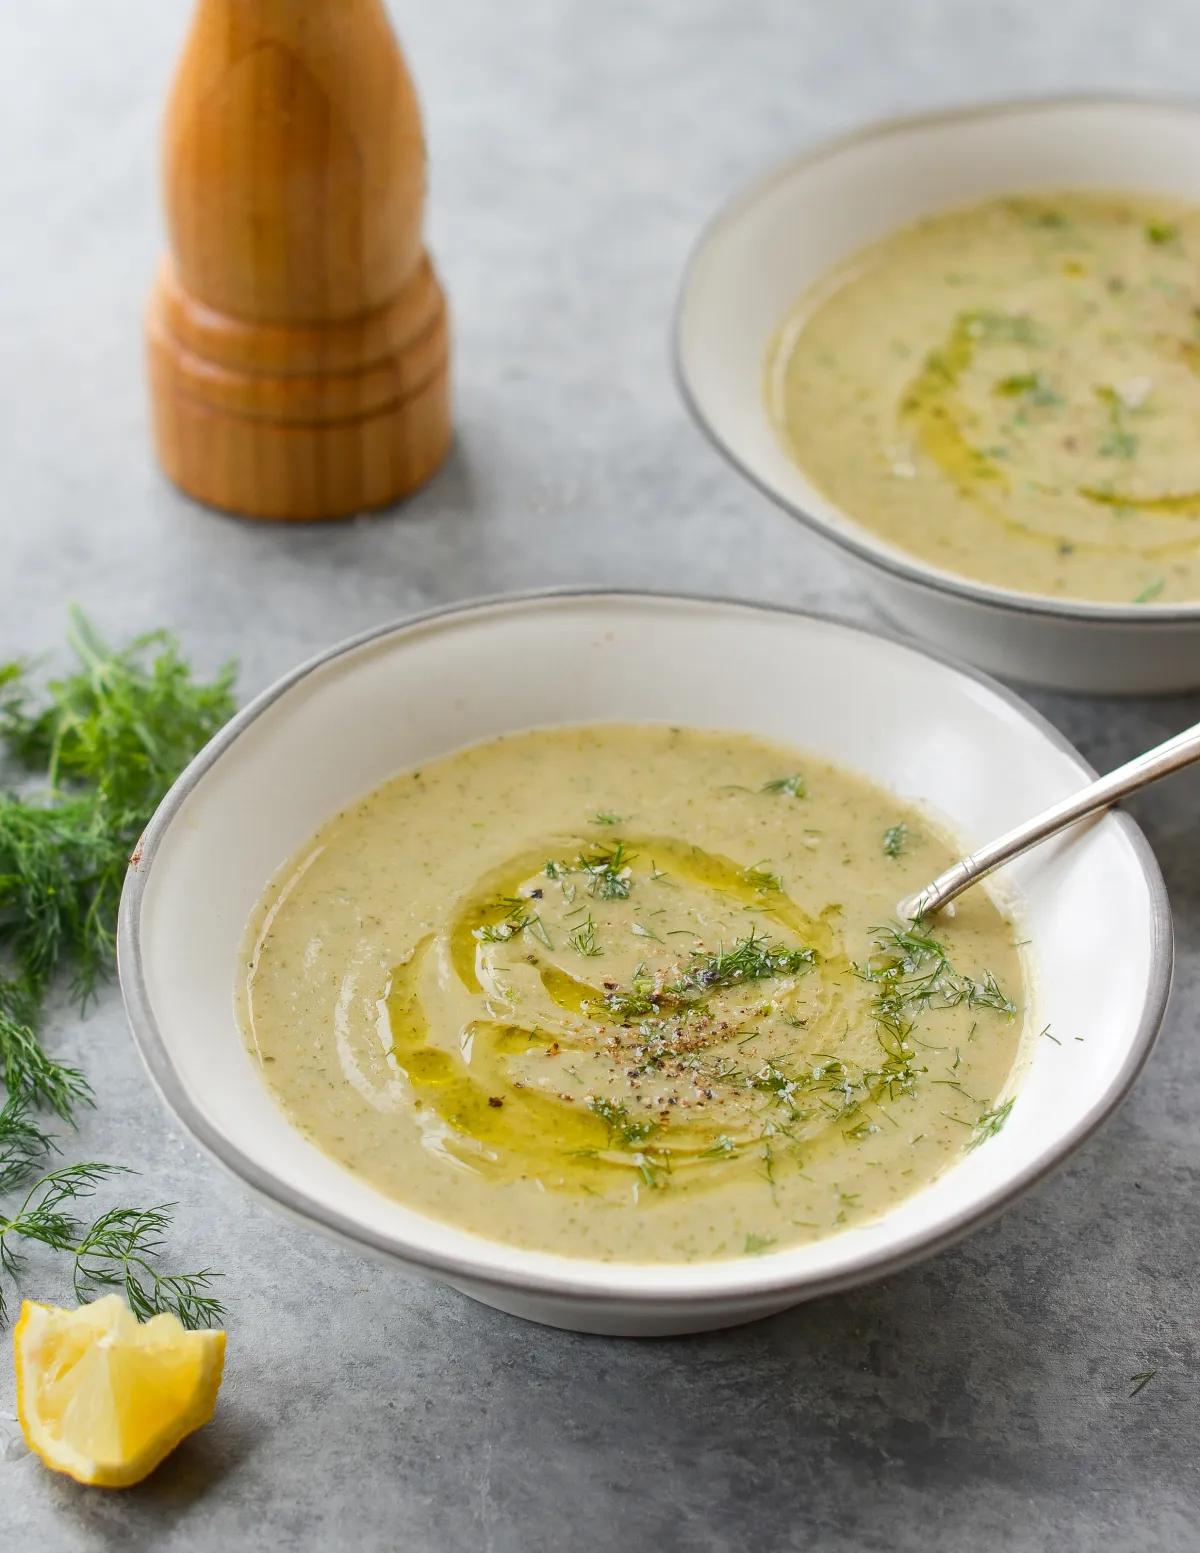 Creamy Zucchini Soup With Walnuts and Dill